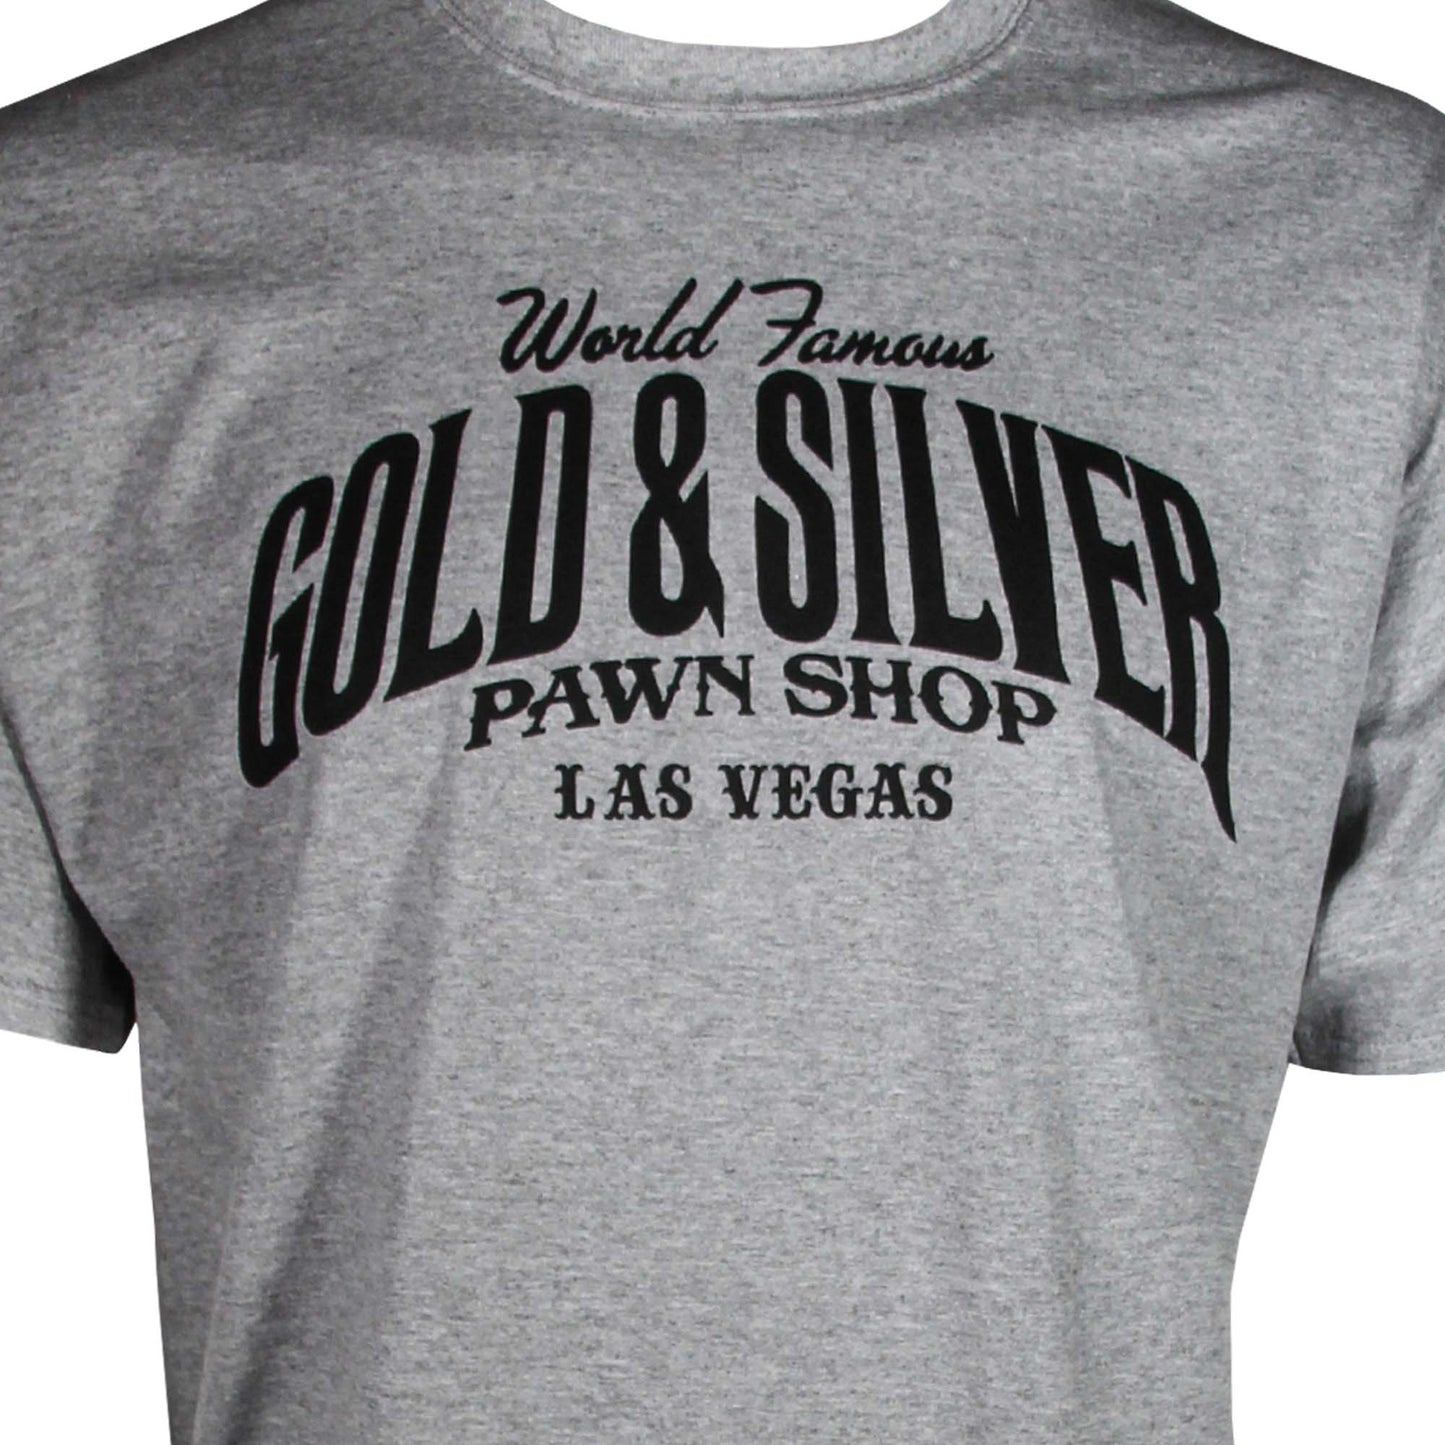 Gold & Silver Pawn Shop Round Neck Basic Short Sleeve T-Shirt Five